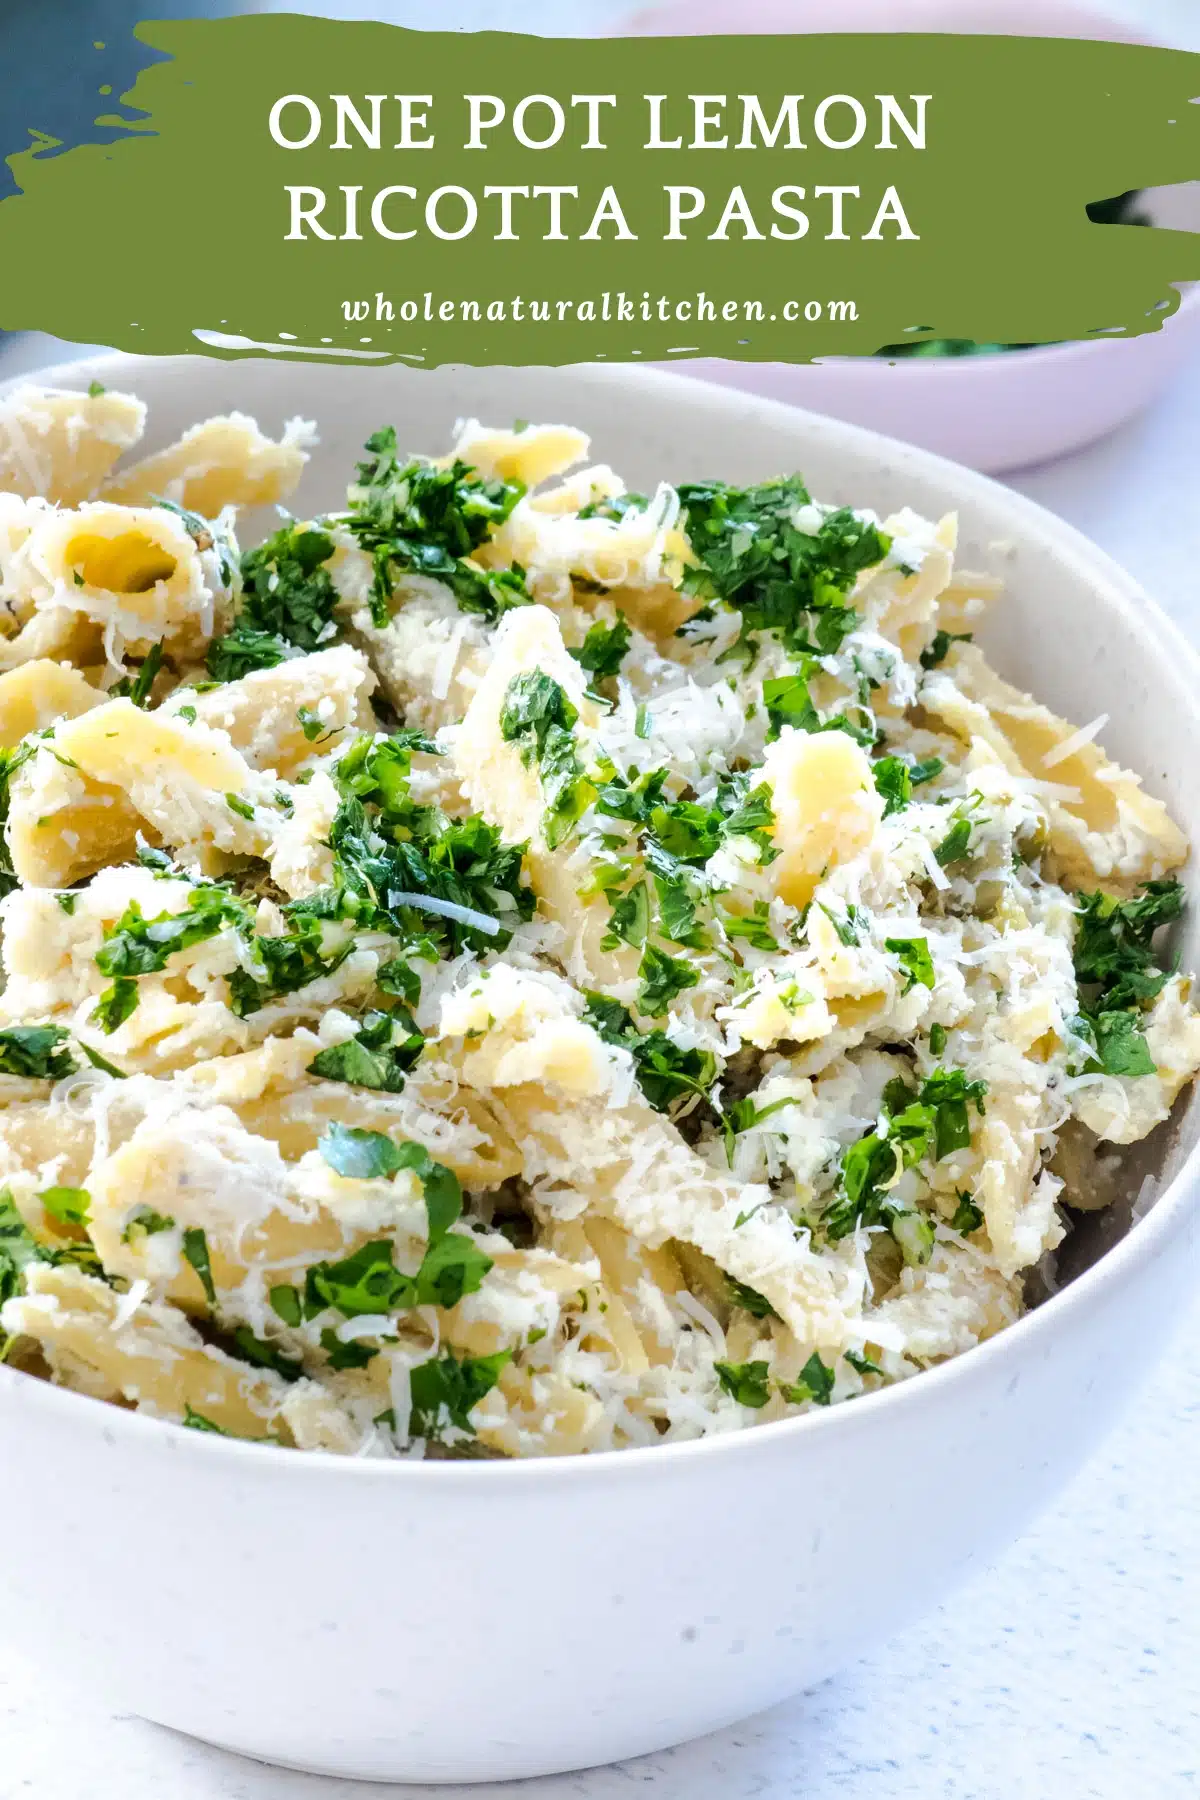 A Pinterest poster image showing the name of the recipe and the website name at the top on a green background, along with a bowl of the one pot lemon ricotta pasta sitting on a white table.